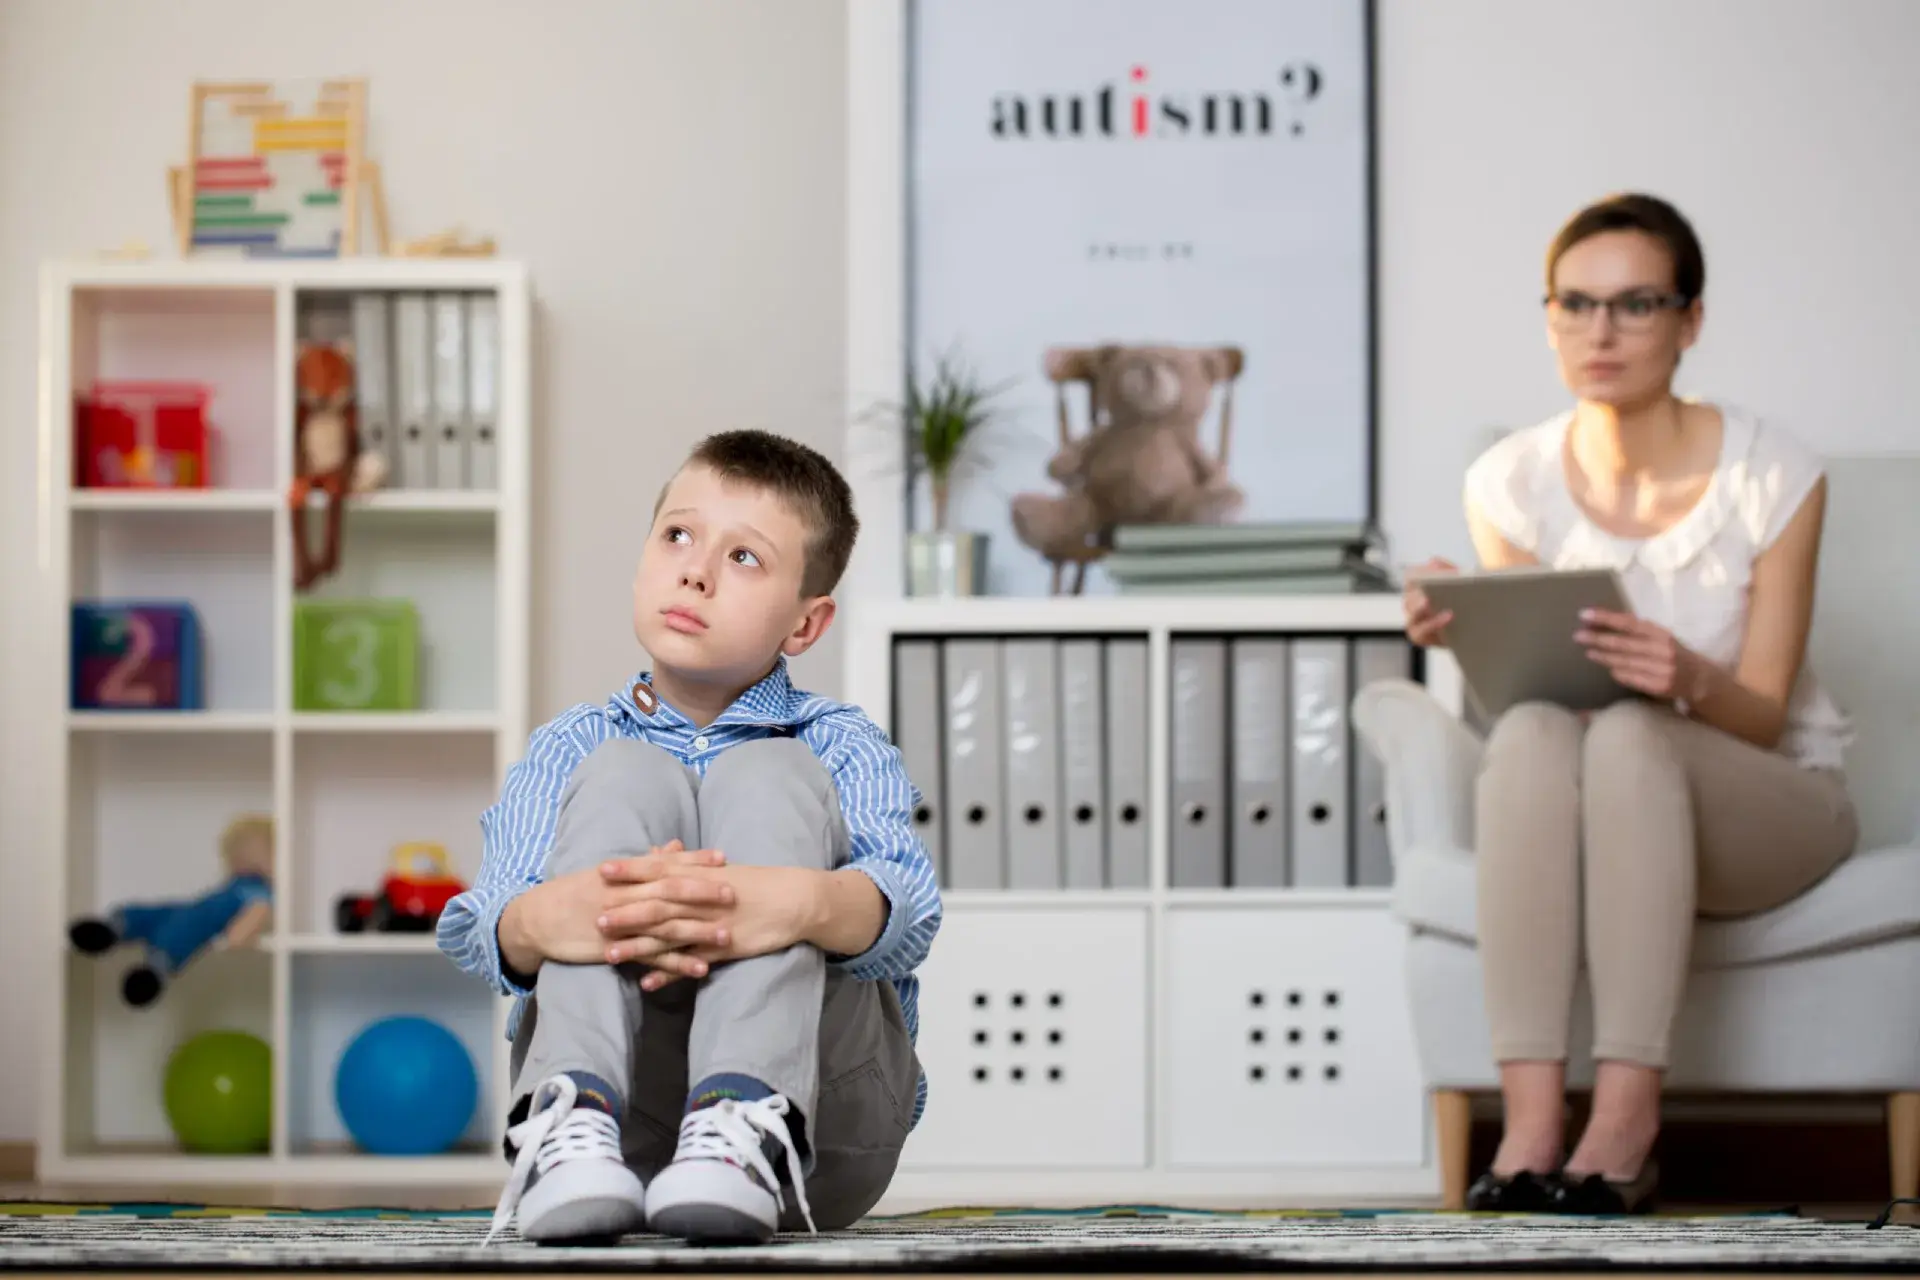 Psychologist observing a young boy with autism during a therapy session